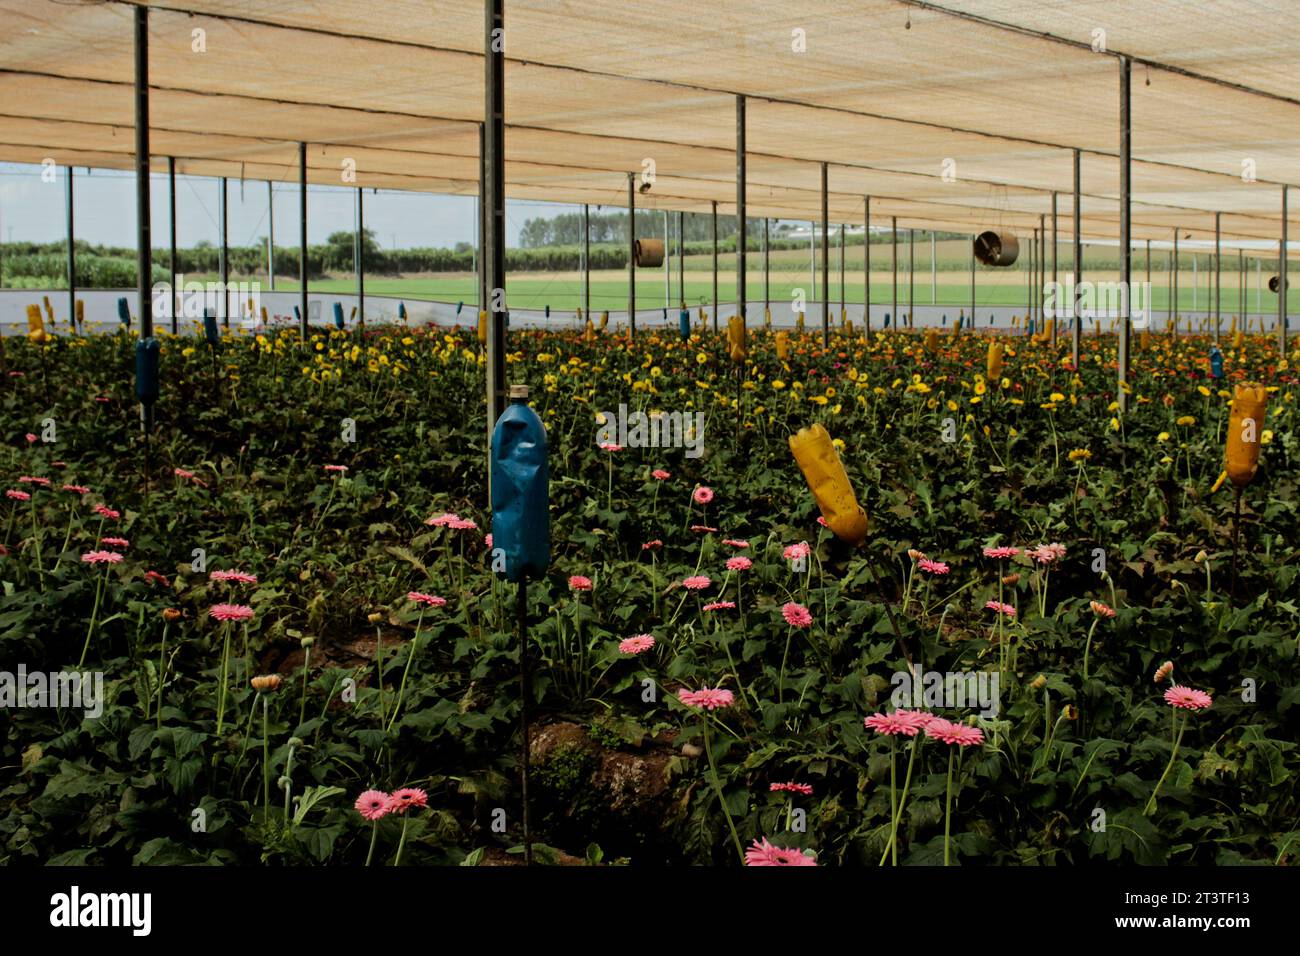 Cultivation of pink, yellow and orange gerbera flowers in a seedling nursery of a cut flower production system, in the city of Holambra. Stock Photo